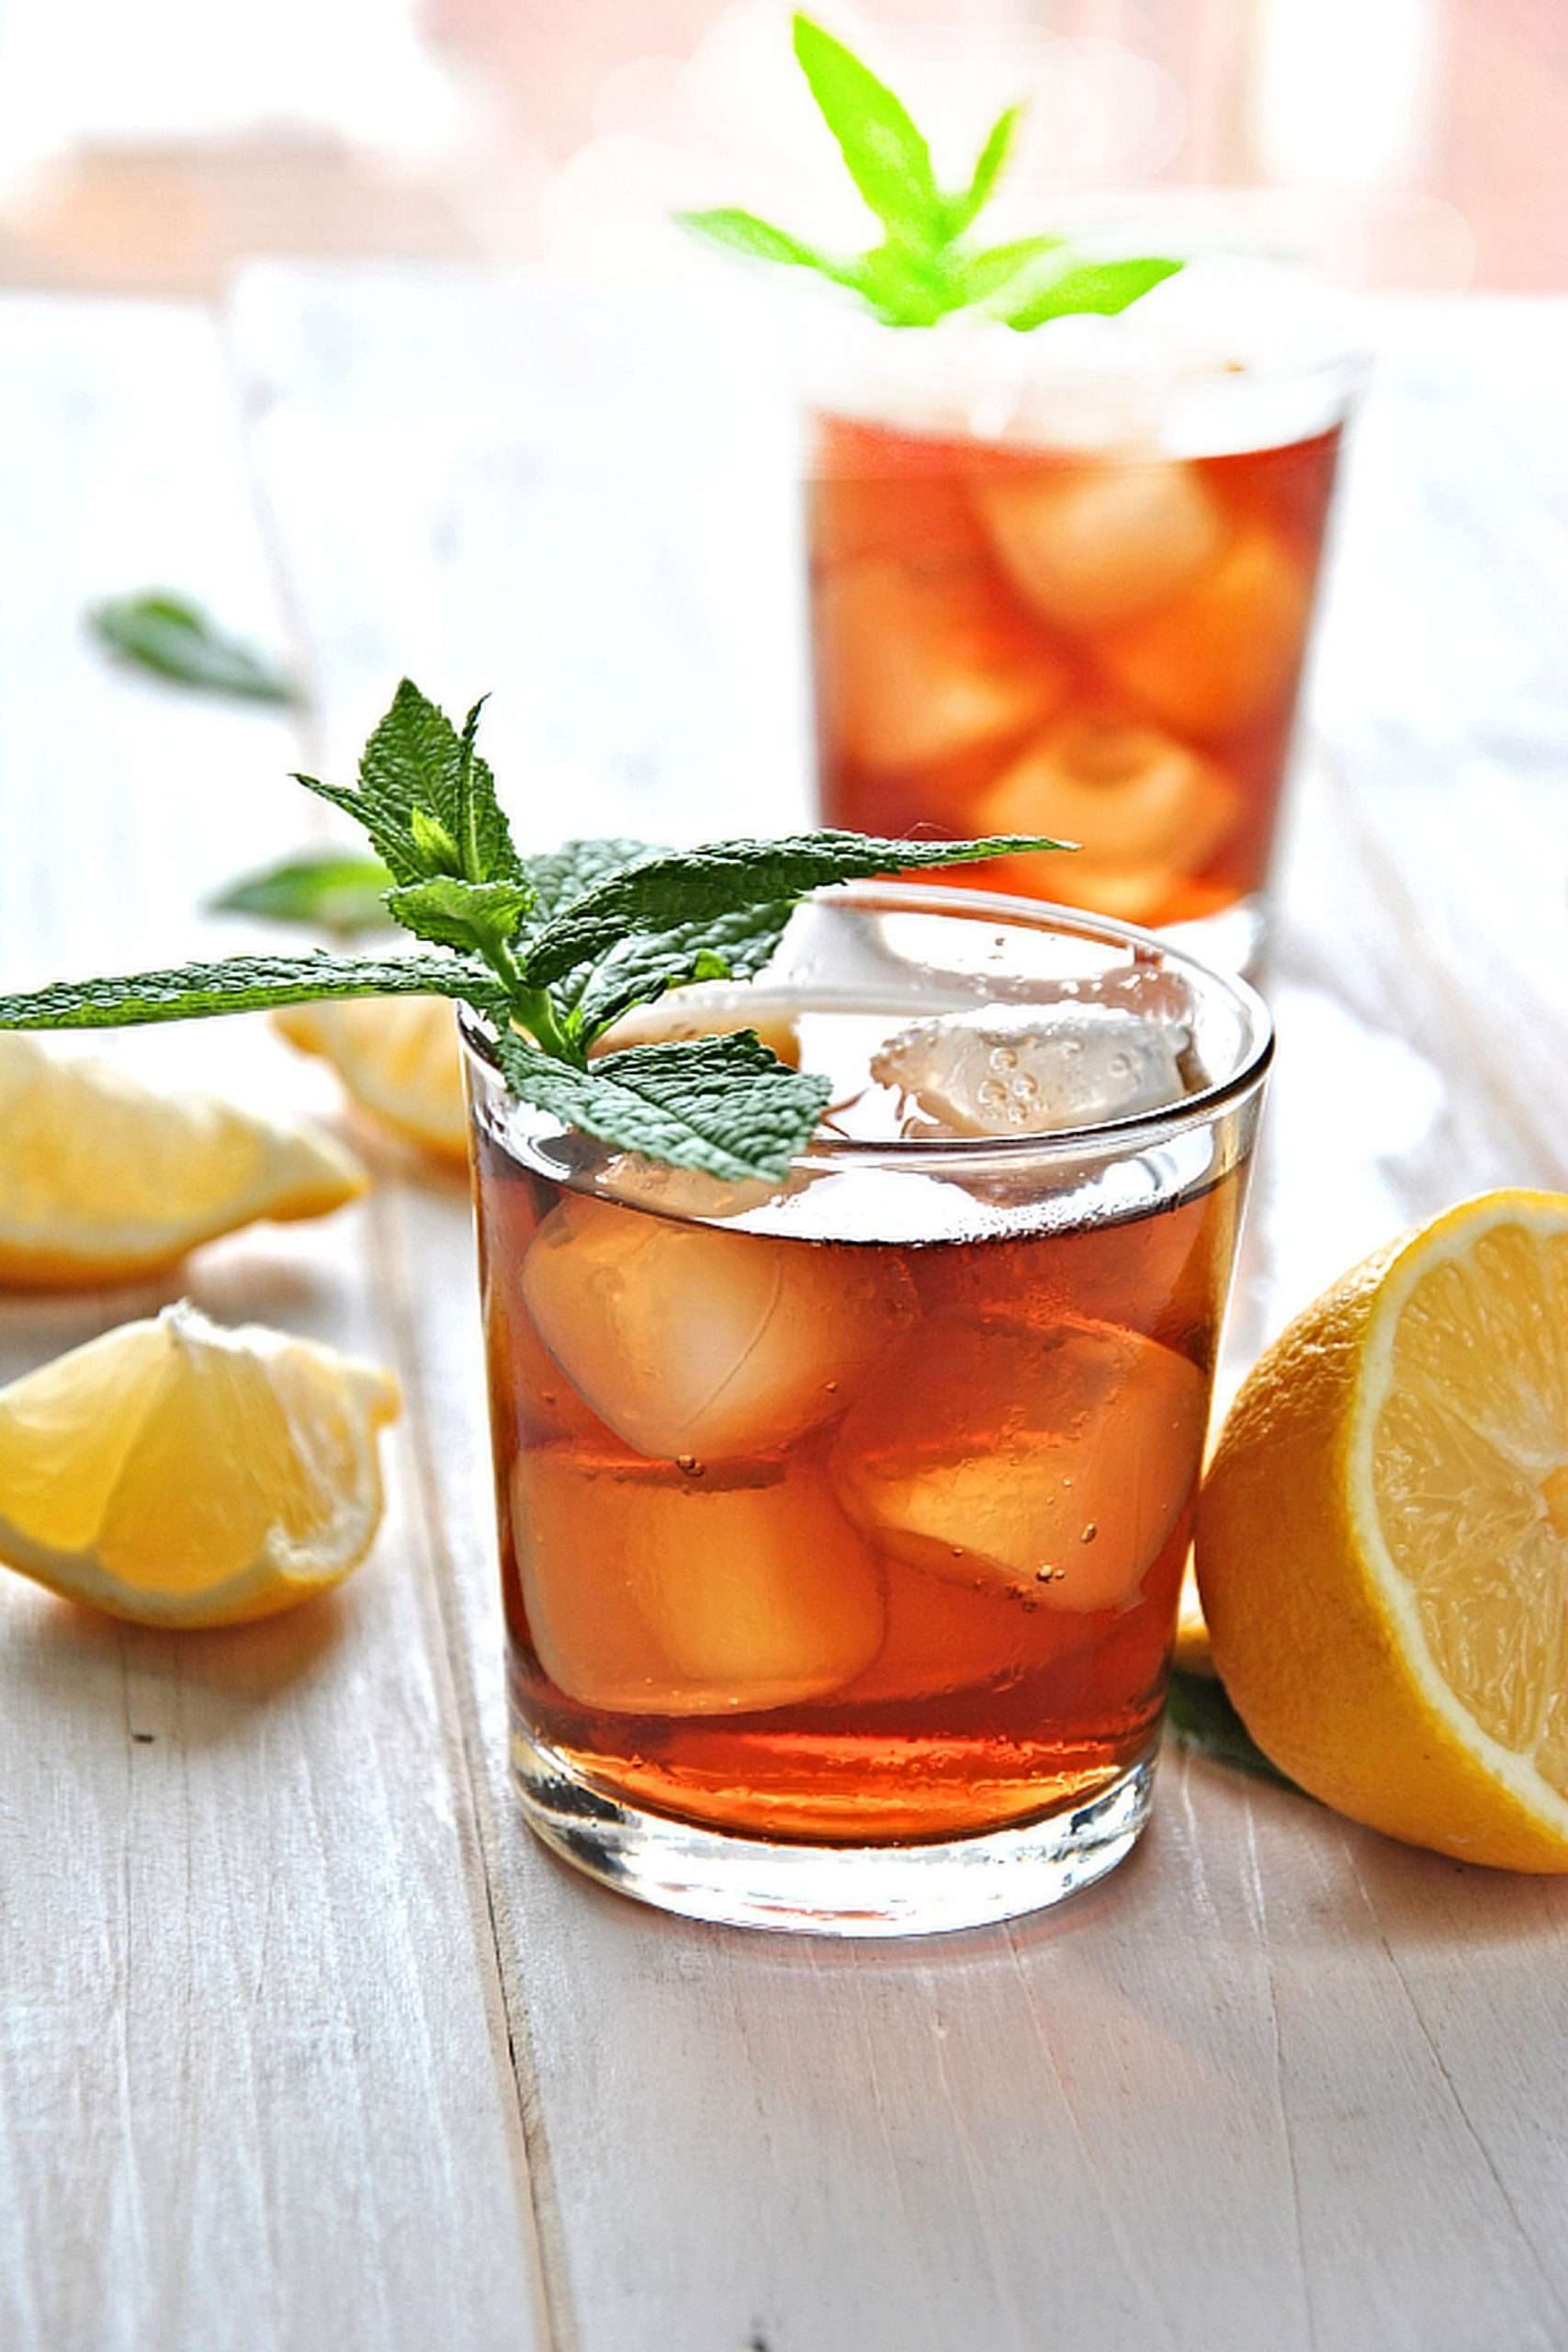 How to Make Southern Sweet Tea and other Iced Tea Recipes